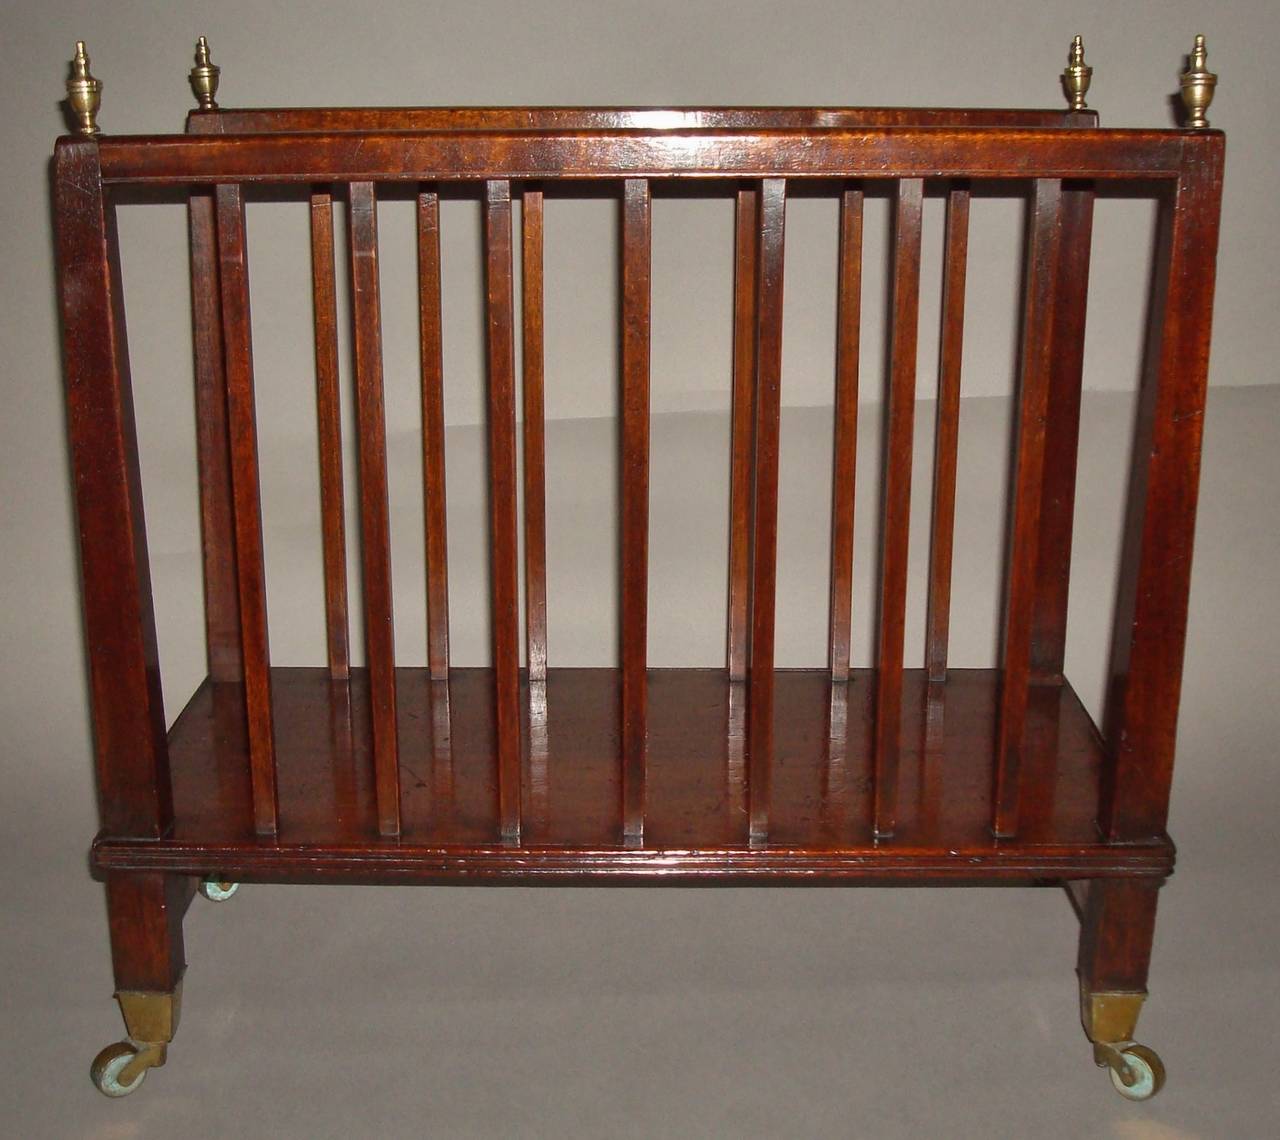 An unusual Regency mahogany canterbury / folio stand of elegant proportions, the square tapering end supports terminating in brass finials united by a moulded top rail incorporating seven square slats to either side, raised on a platform base with a